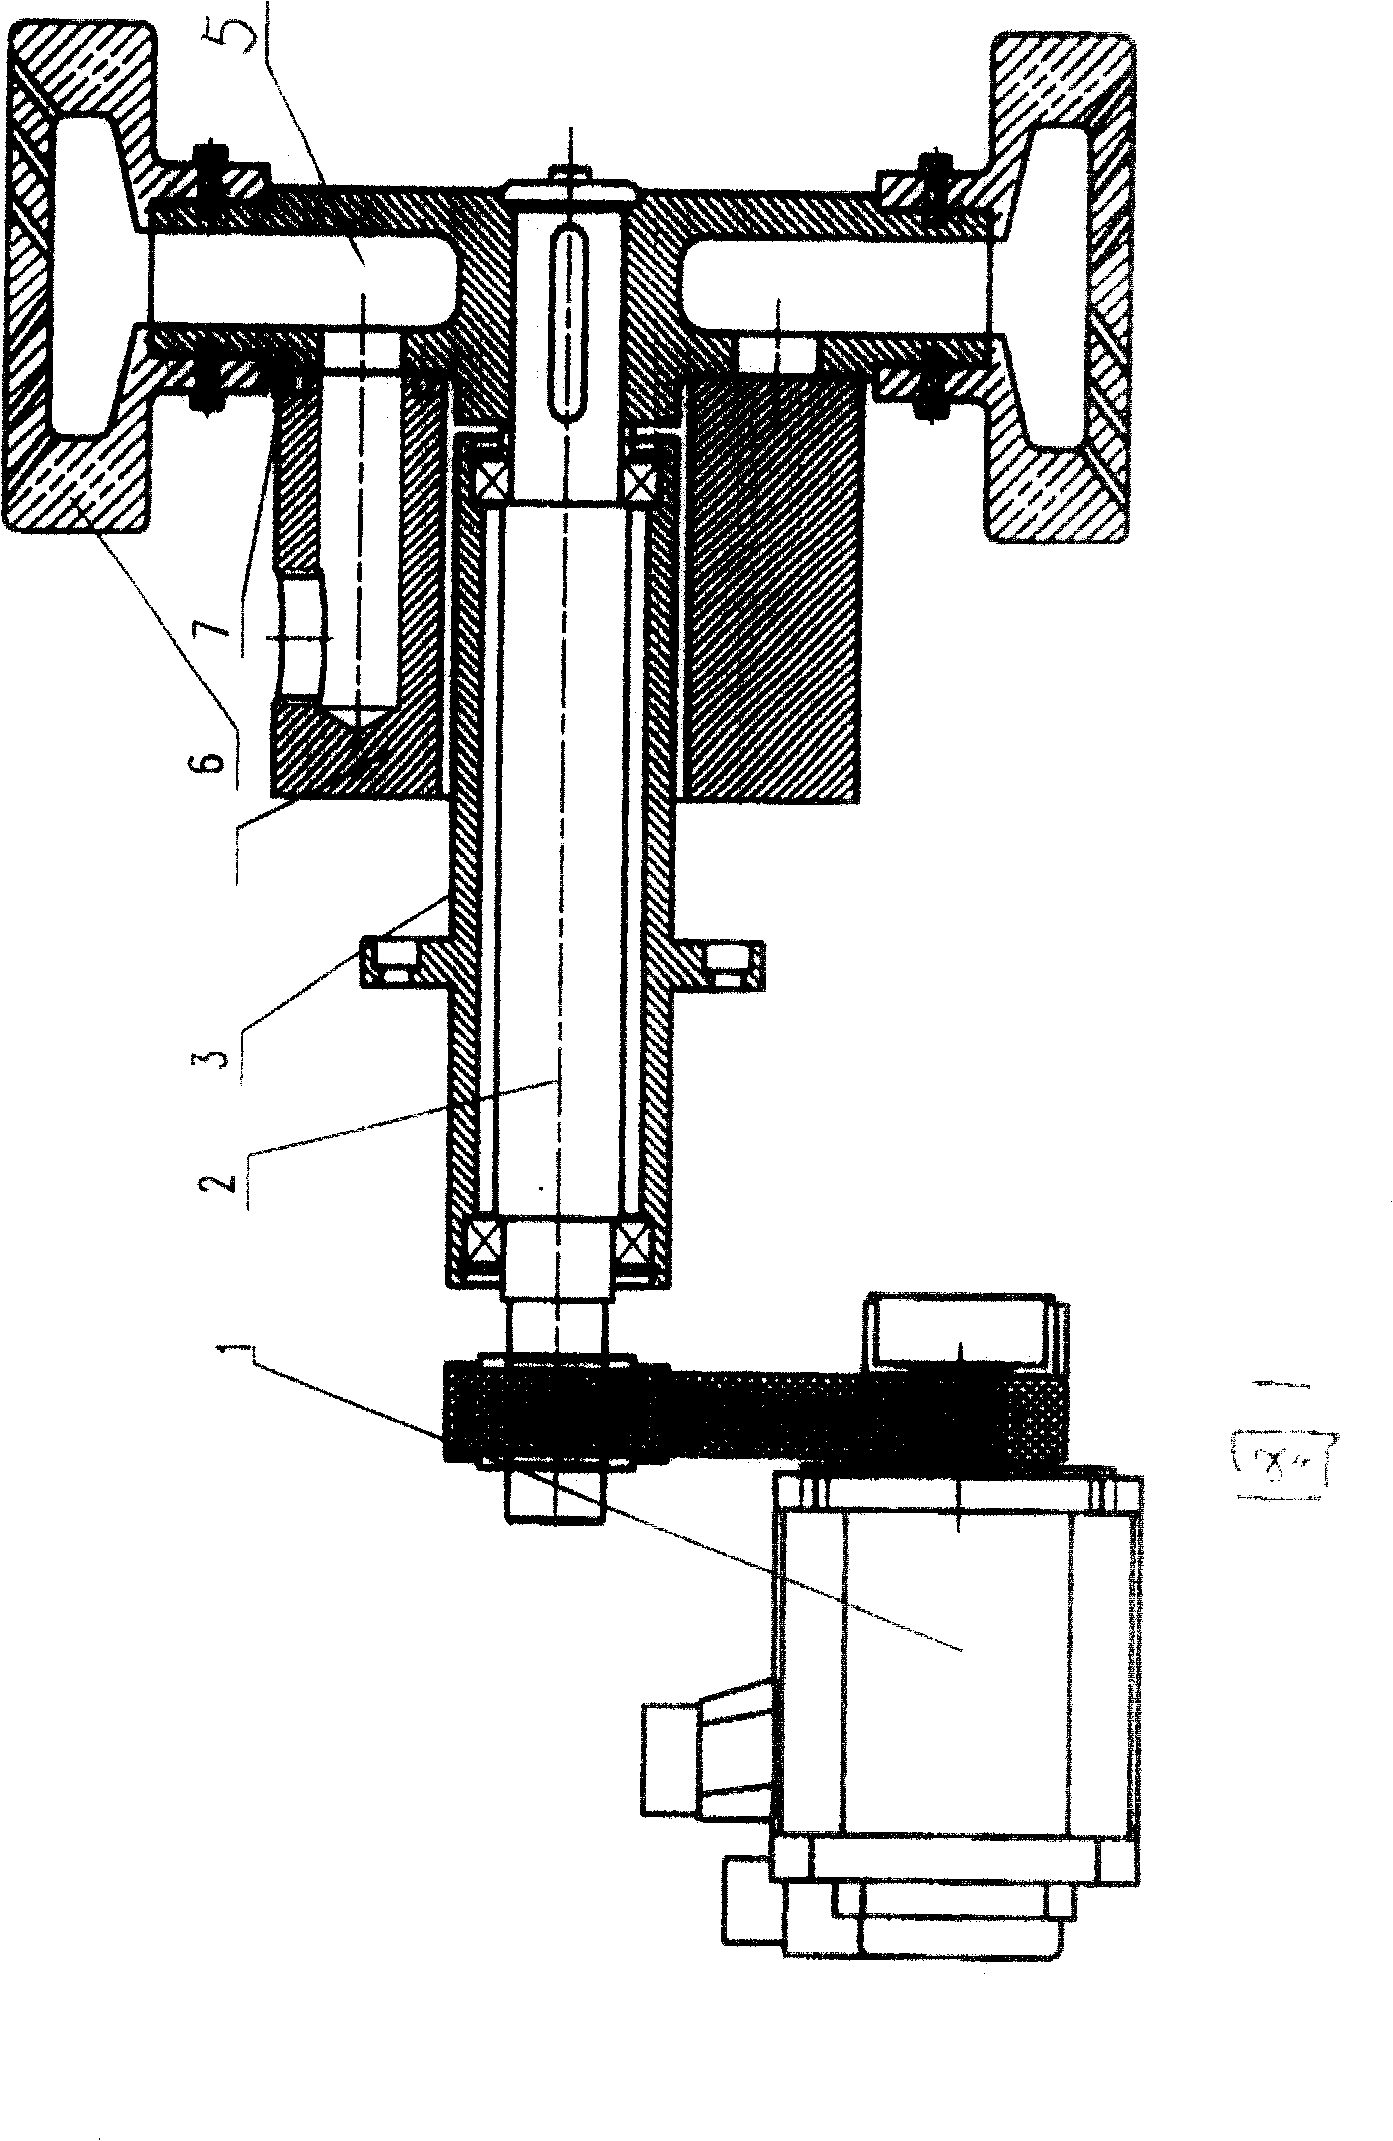 Shortened interval transfer in disposable sanitary article producing line